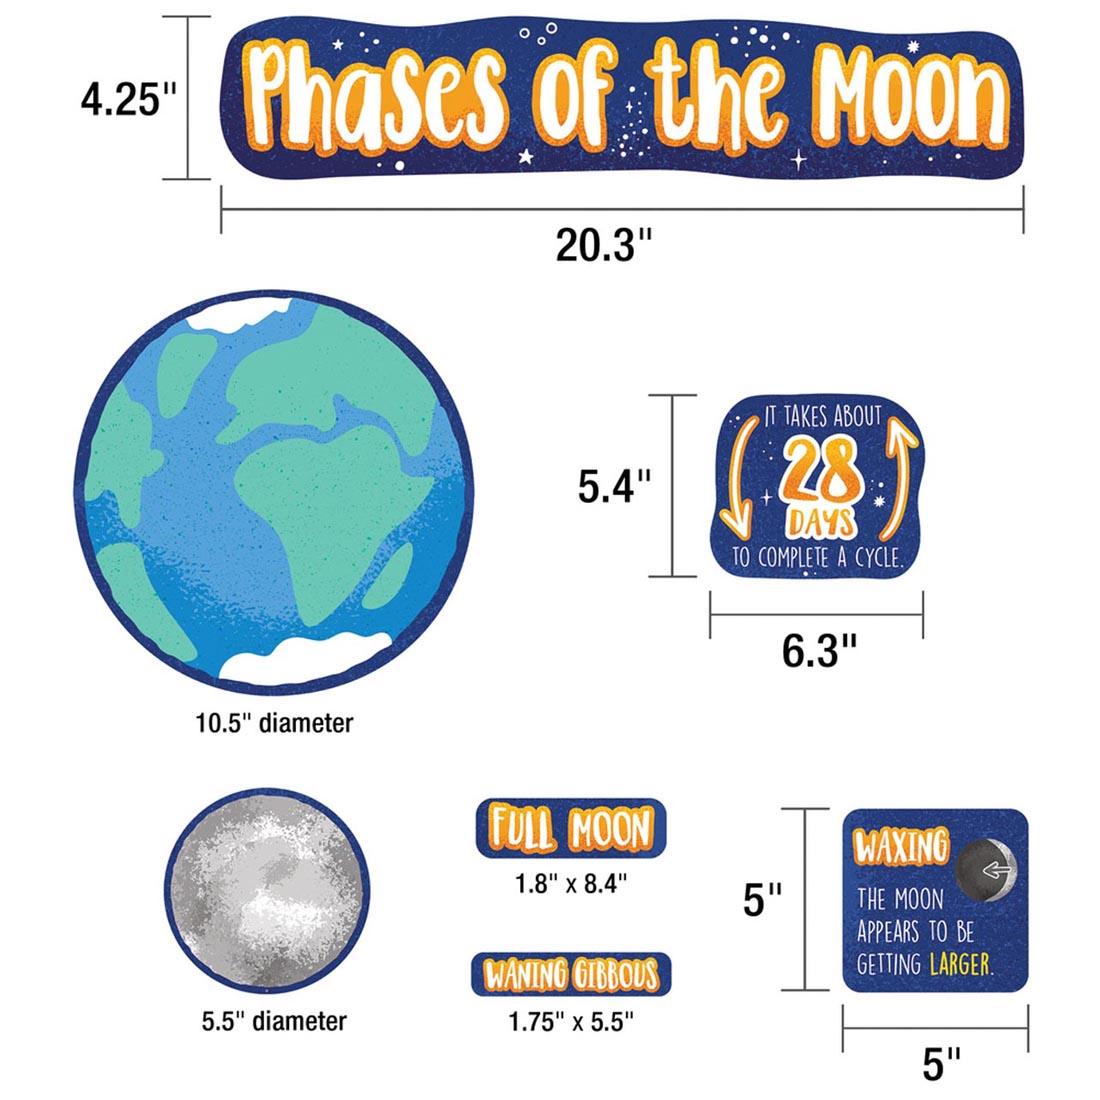 Pieces of the Phases of the Moon Mini Bulletin Board Set by Carson Dellosa with their measurements